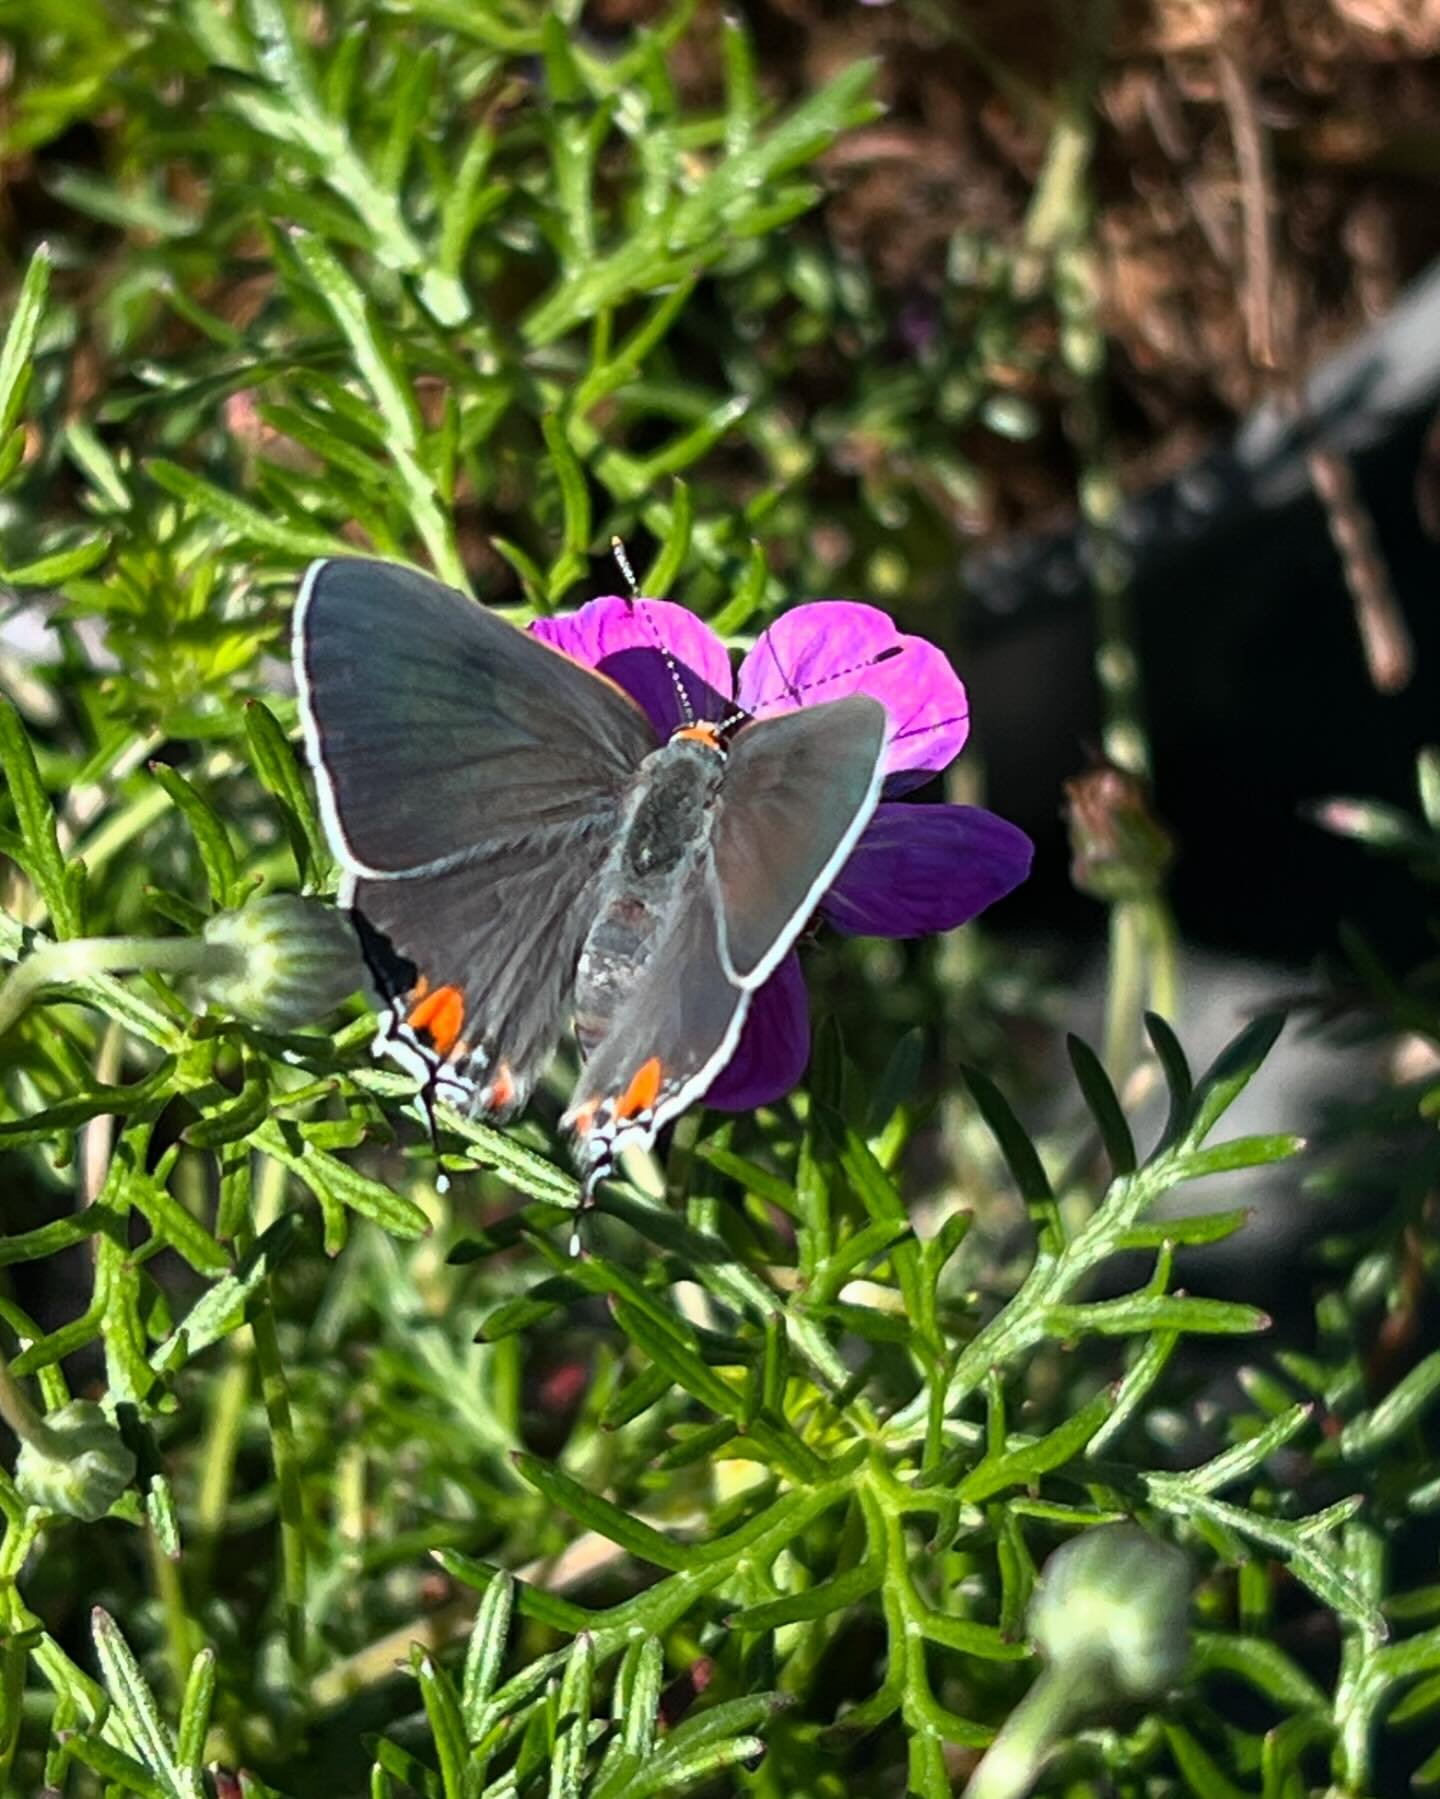 We spotted this beautiful little Gray hairstreak (gossamer winged butterfly) exploring the one-gallon sun beds. 🌸 Swipe to see how beautiful it looks with its wings closed 🦋💕

➡️ If you haven&rsquo;t signed up for our newsletter yet, and you want 